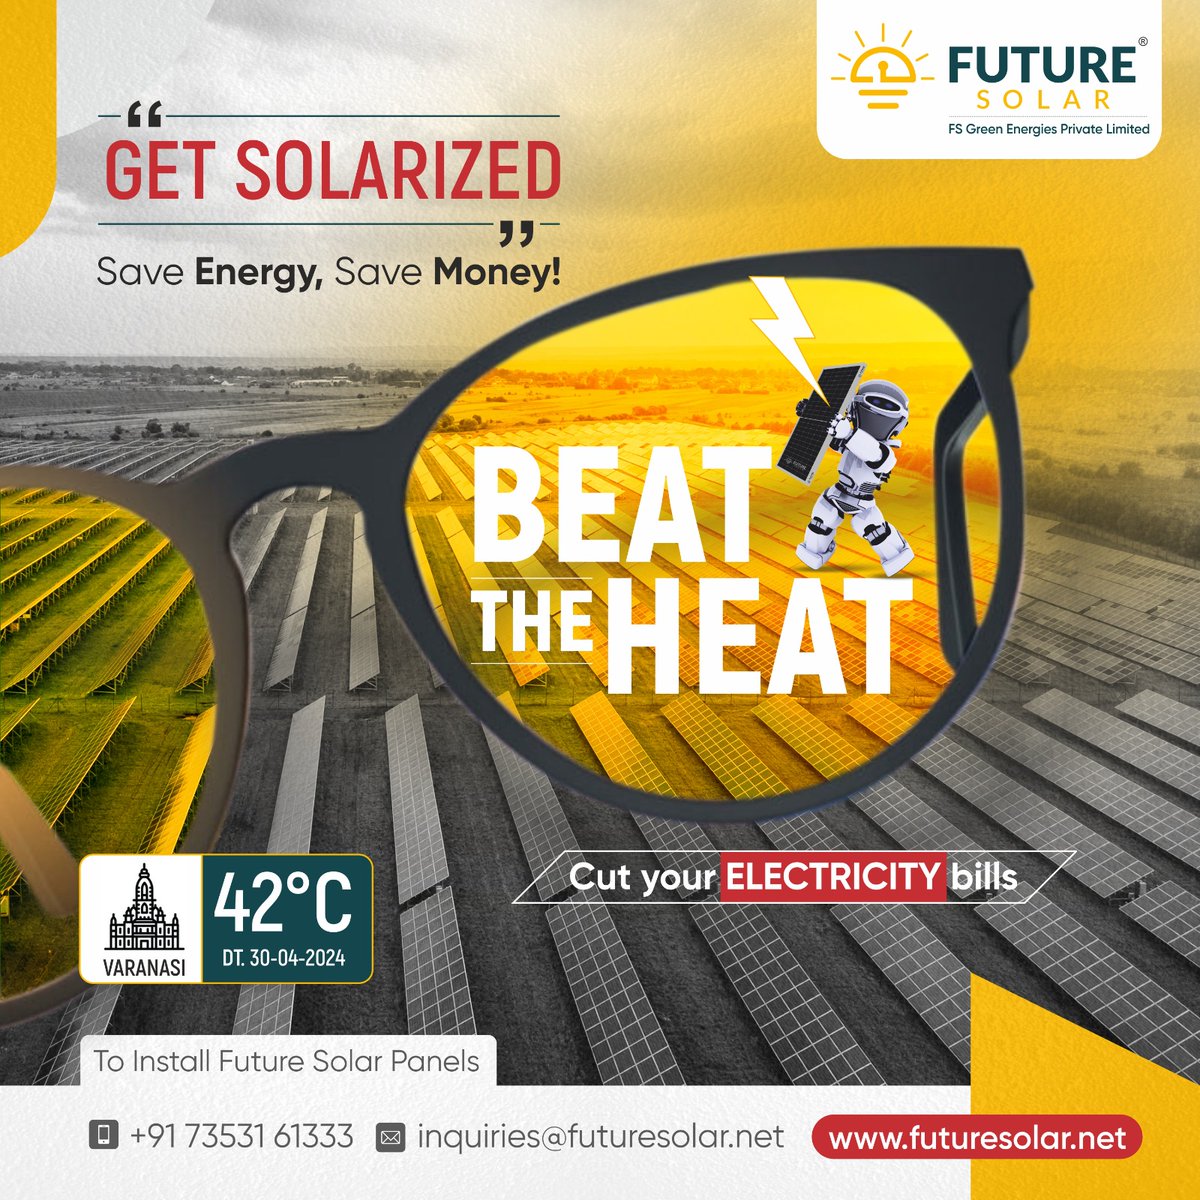 #Beattheheat with Future Solar panels. Varanasi temperature soaring to 42 degree celsius today.
Cut your electric bills by installing solar panels. Get Solarized and Save Money.FutureSolar #SolarEnergy #CleanTech #Renewables